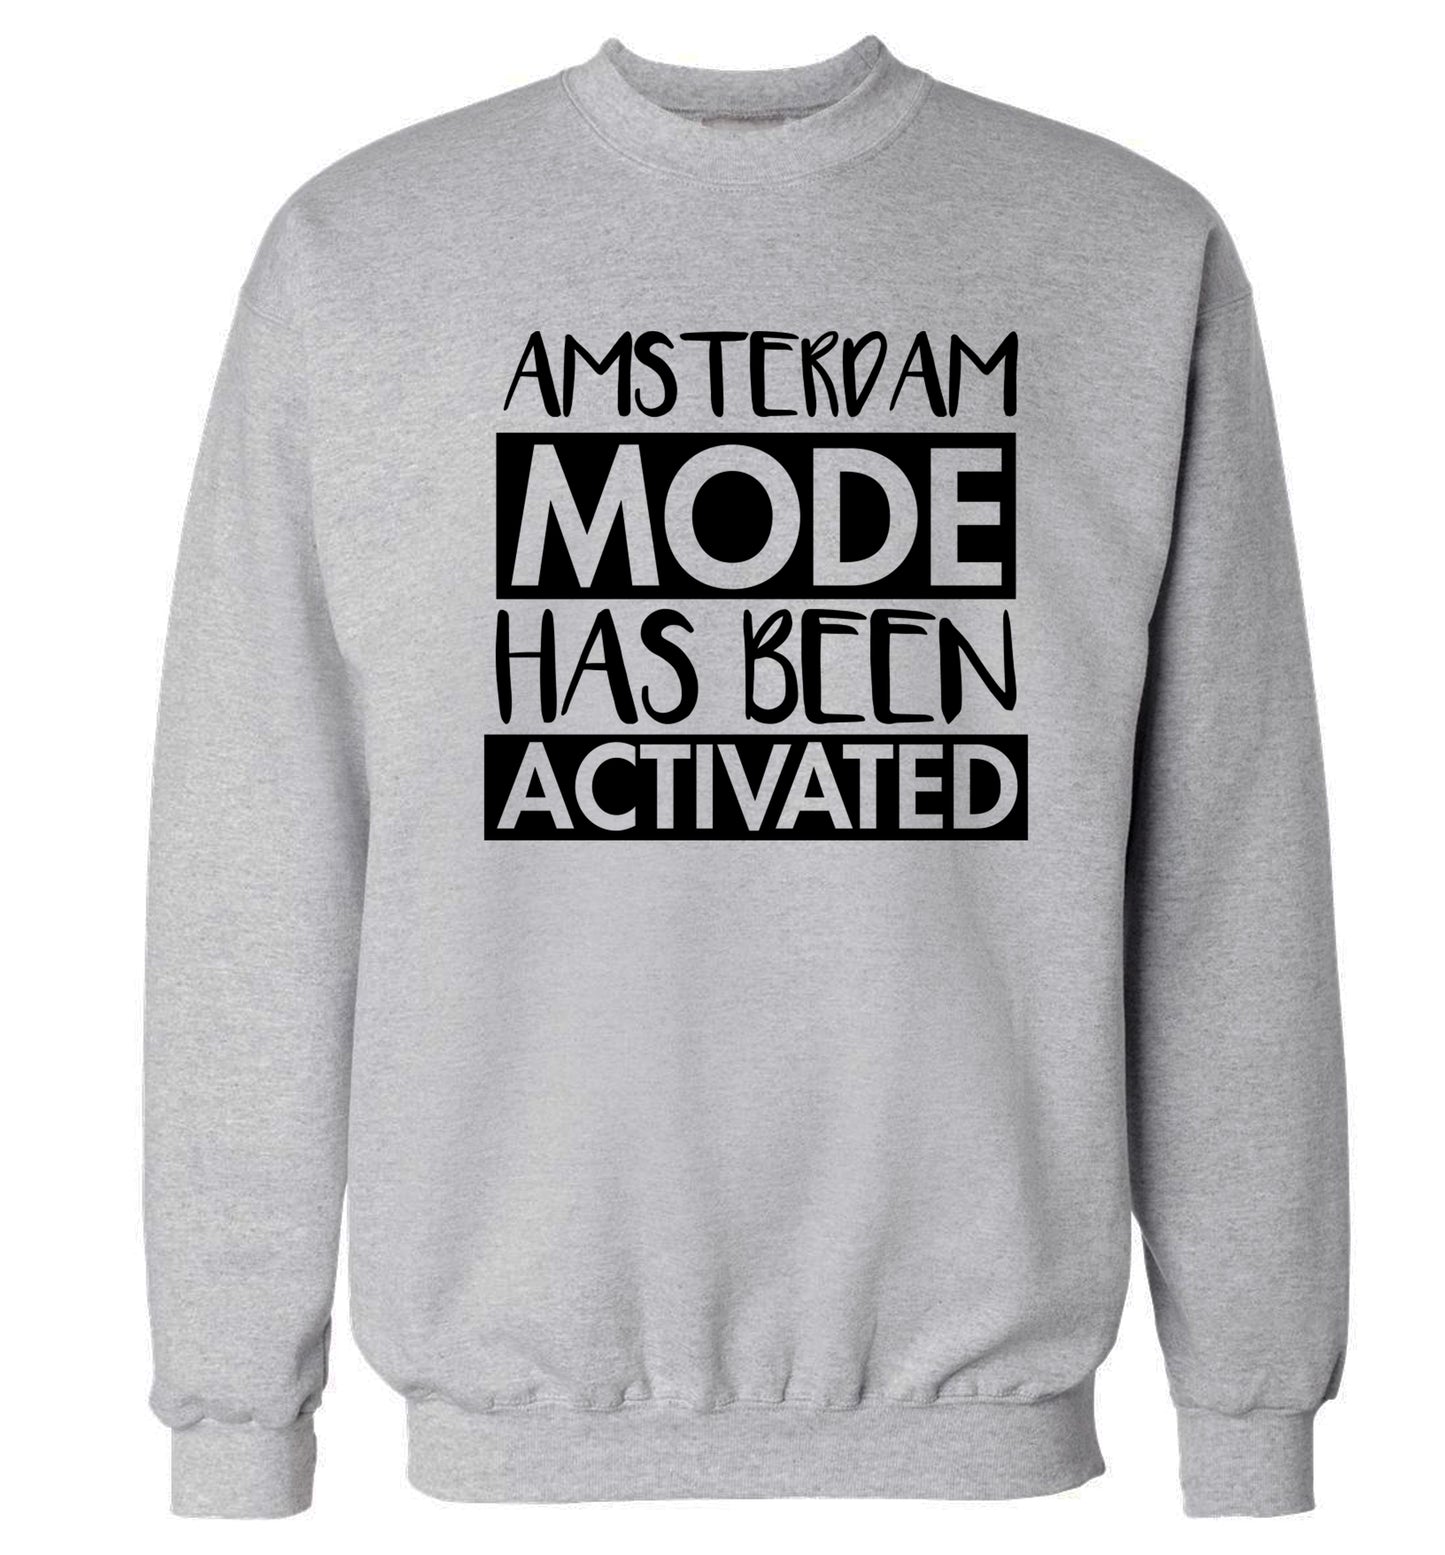 Amsterdam mode has been activated Adult's unisex grey Sweater 2XL